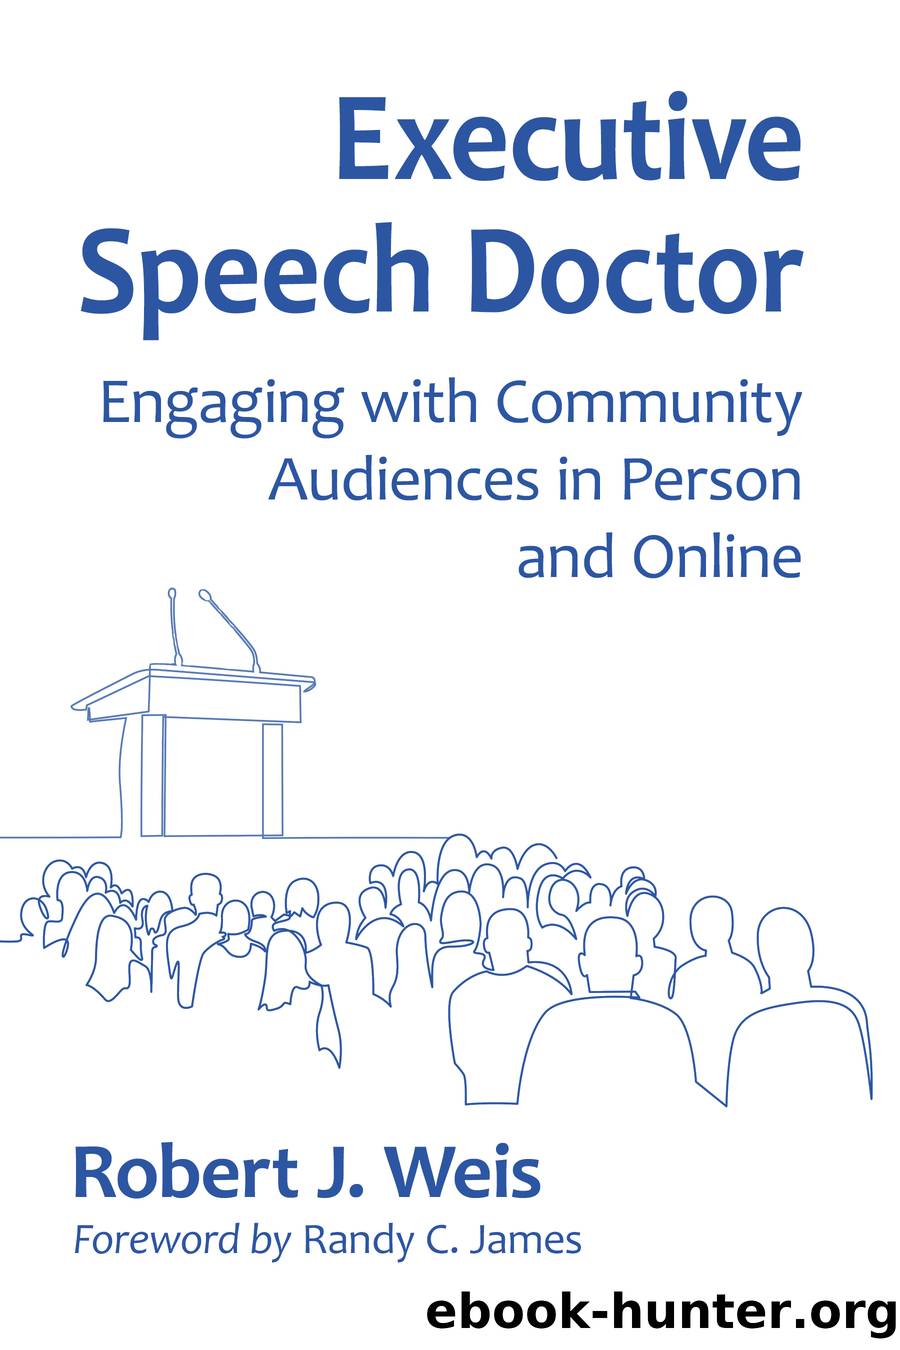 Executive Speech Doctor: Engaging with Community Audiences in Person and Online by Robert J. Weis